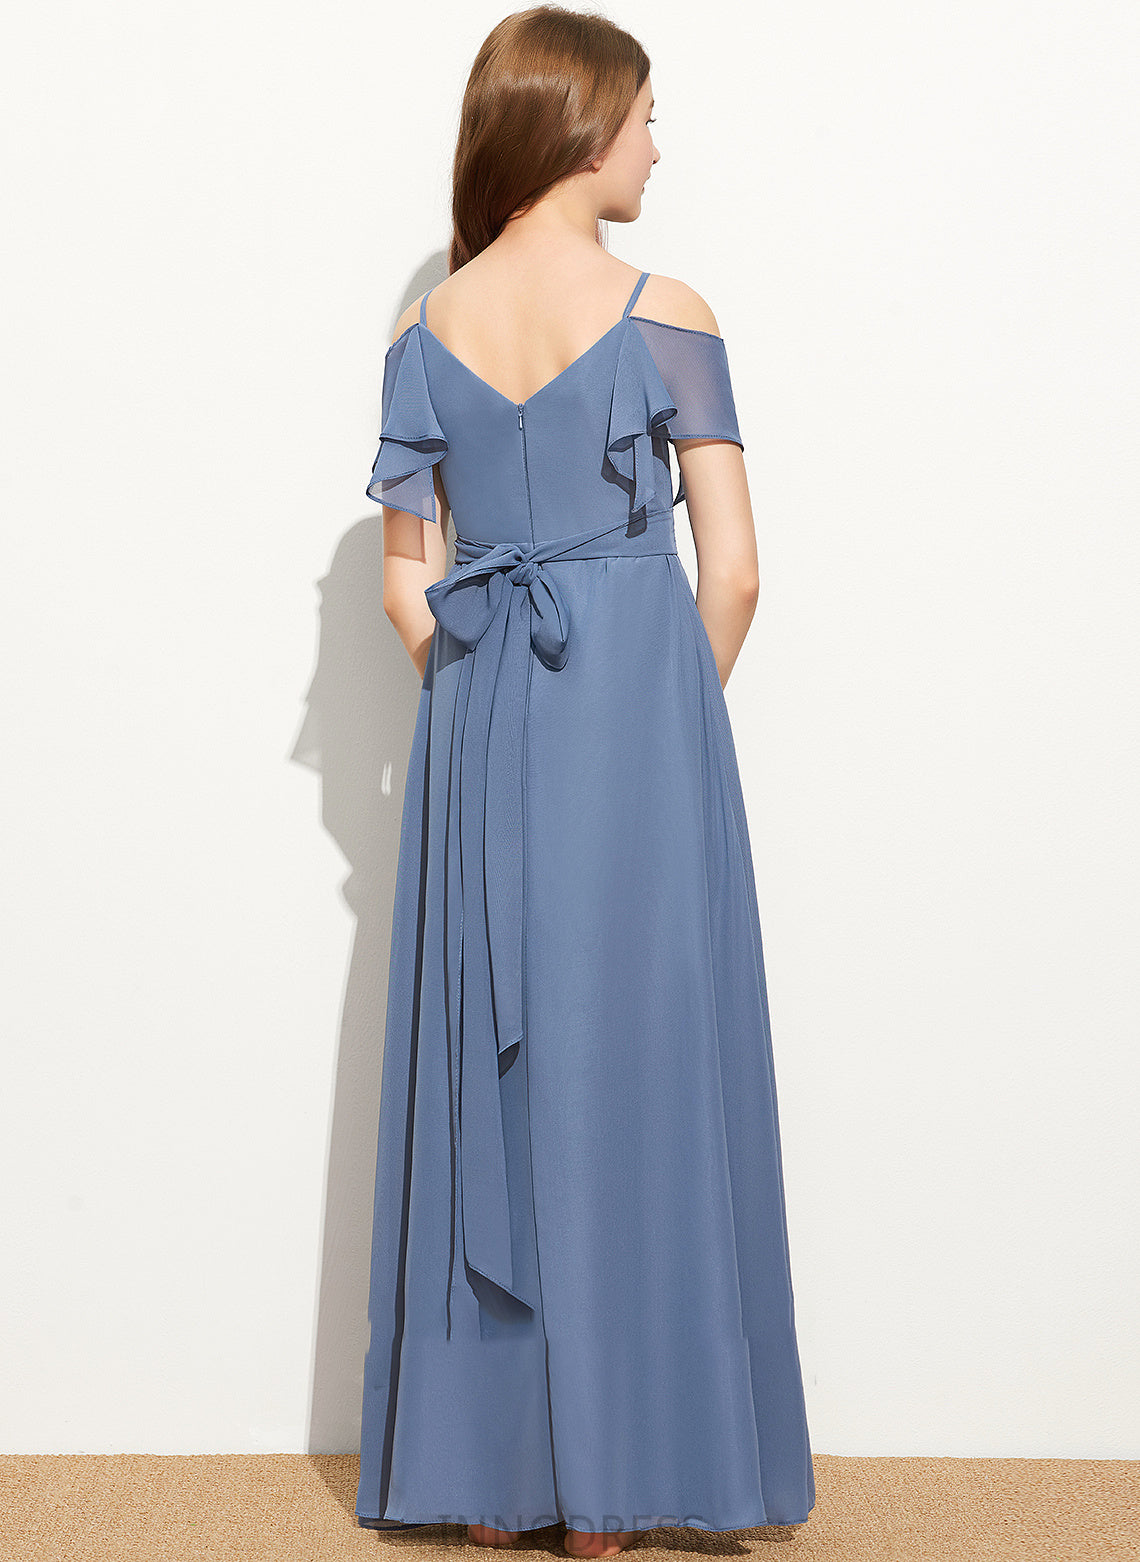 Bow(s) Chiffon Violet Off-the-Shoulder With Junior Bridesmaid Dresses Floor-Length A-Line Ruffle